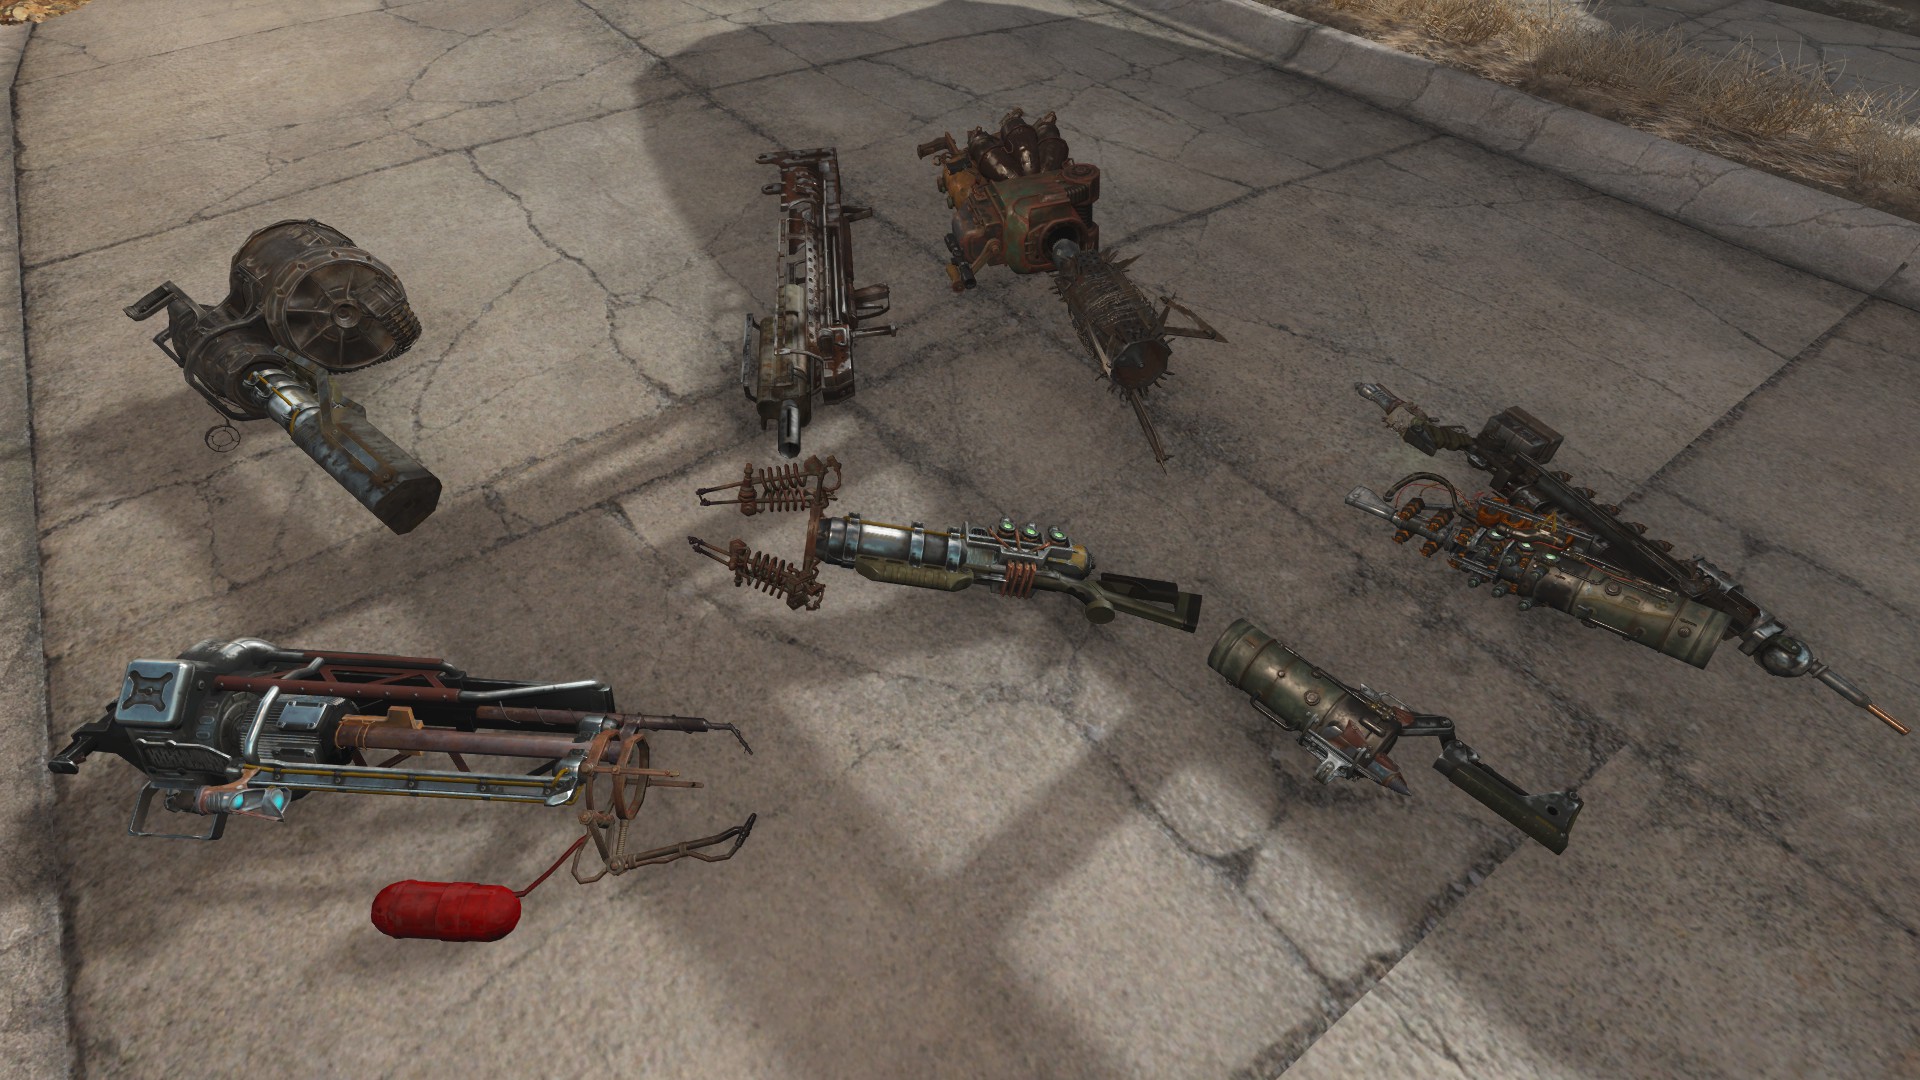 Visible weapons для fallout 4 фото 54